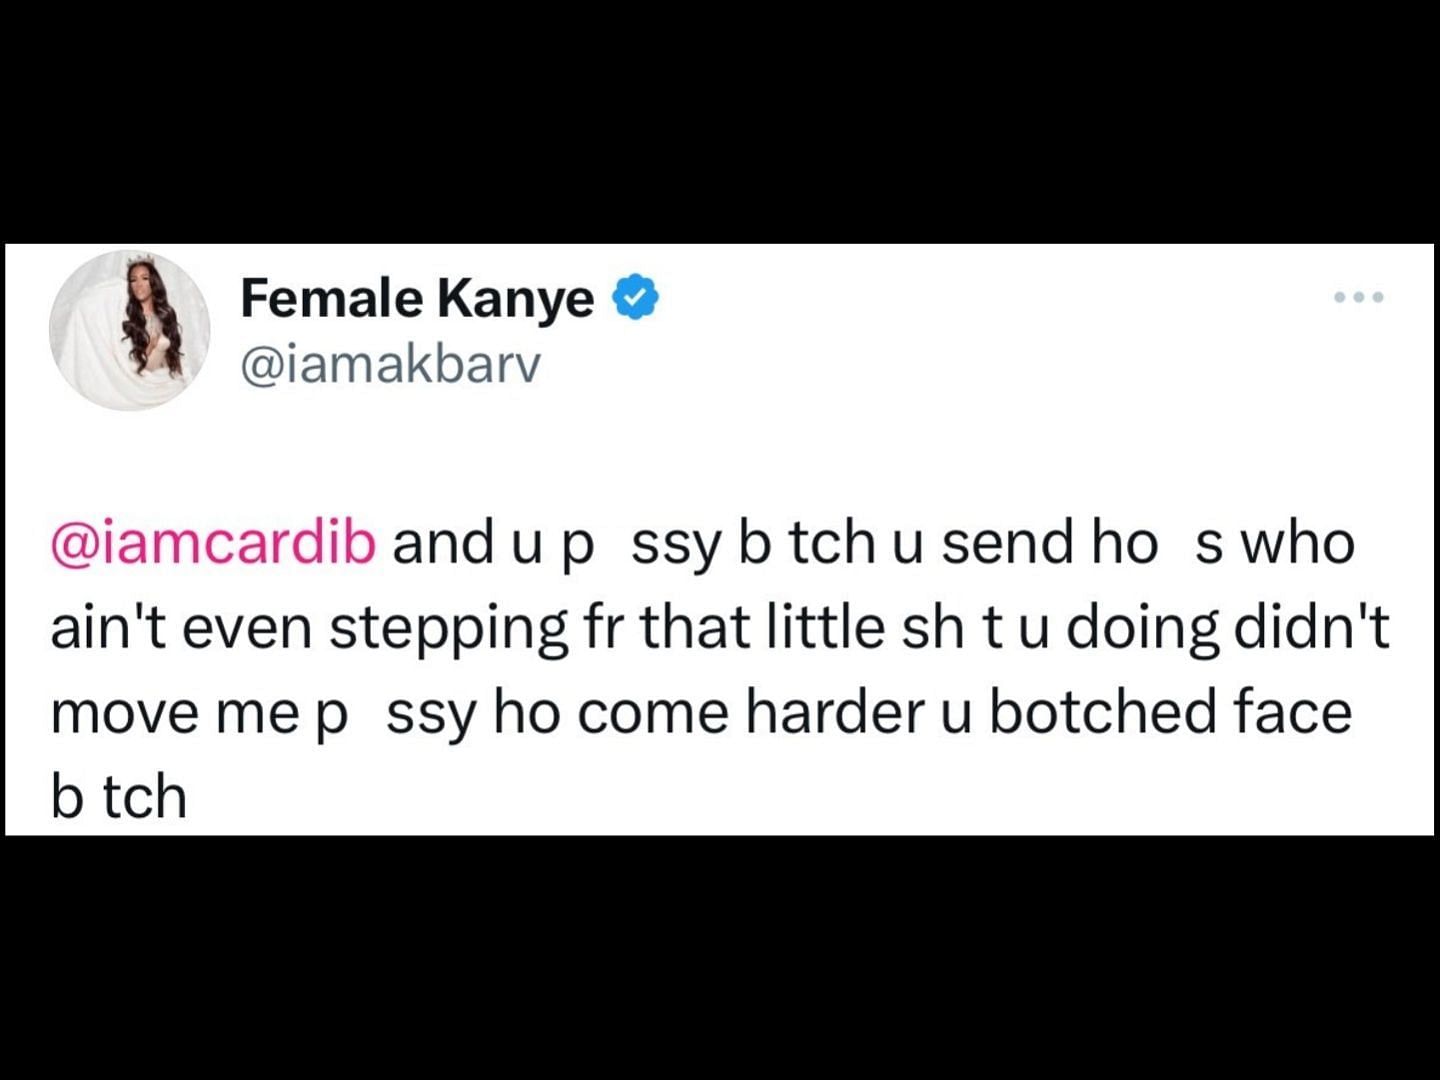 Akbar V directly called out Cardi B, accusing her of the attack. (Image via X/@MobzWorld)